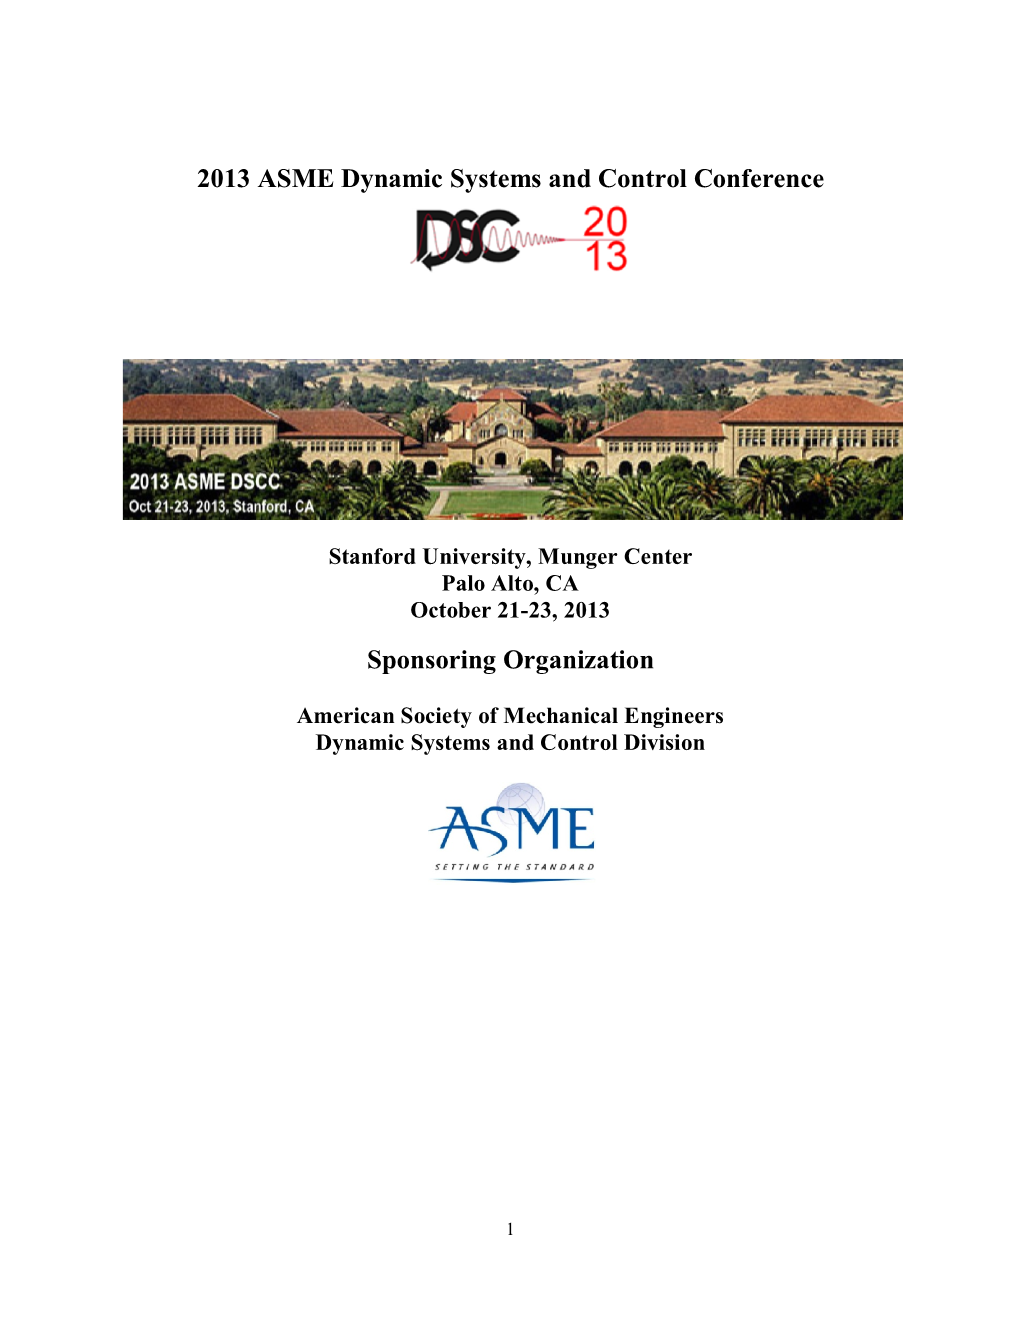 2013 ASME Dynamic Systems and Control Conference Sponsoring Organization